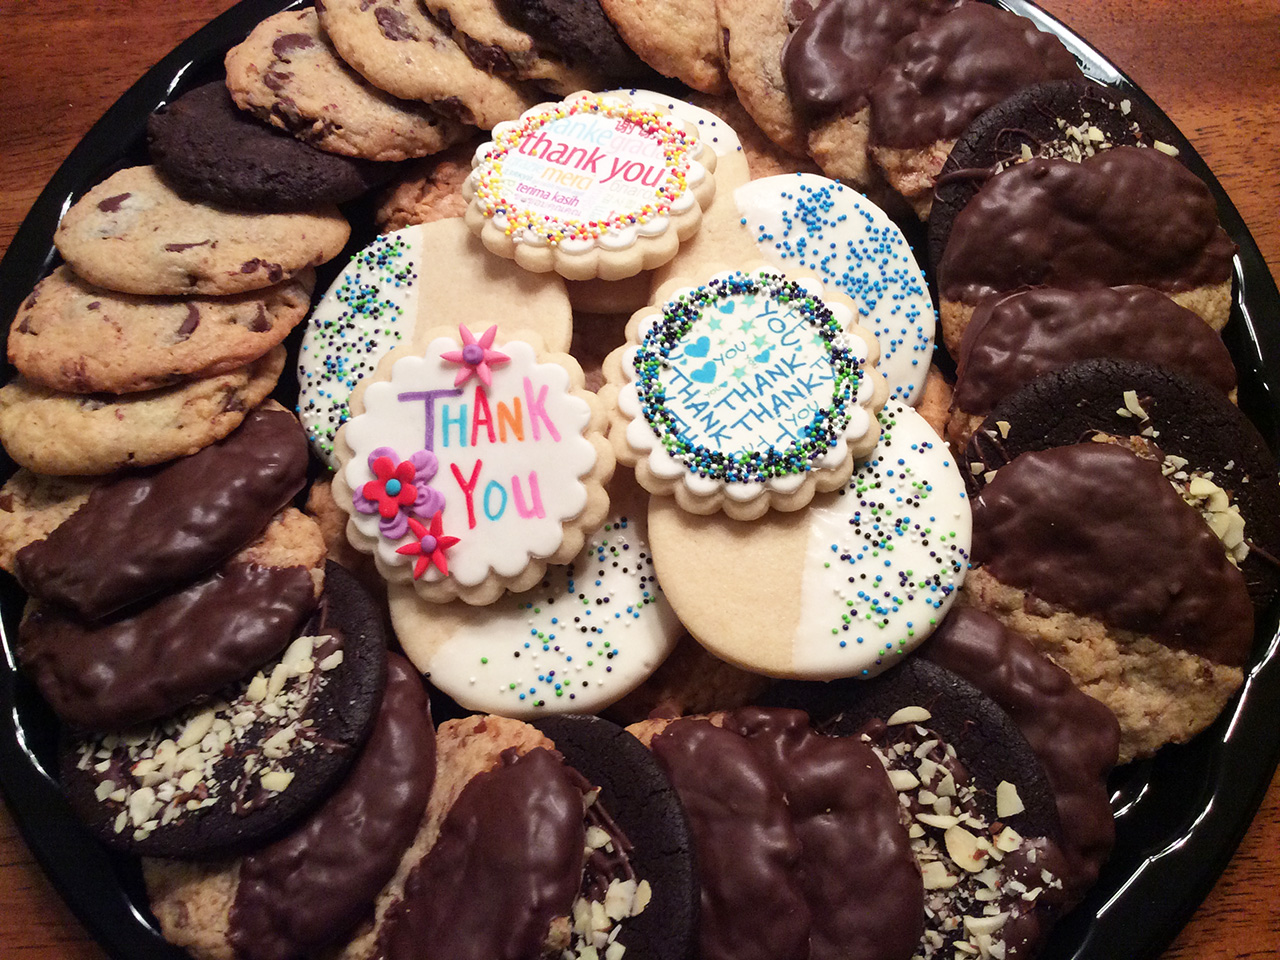 Assorted Cookie Tray